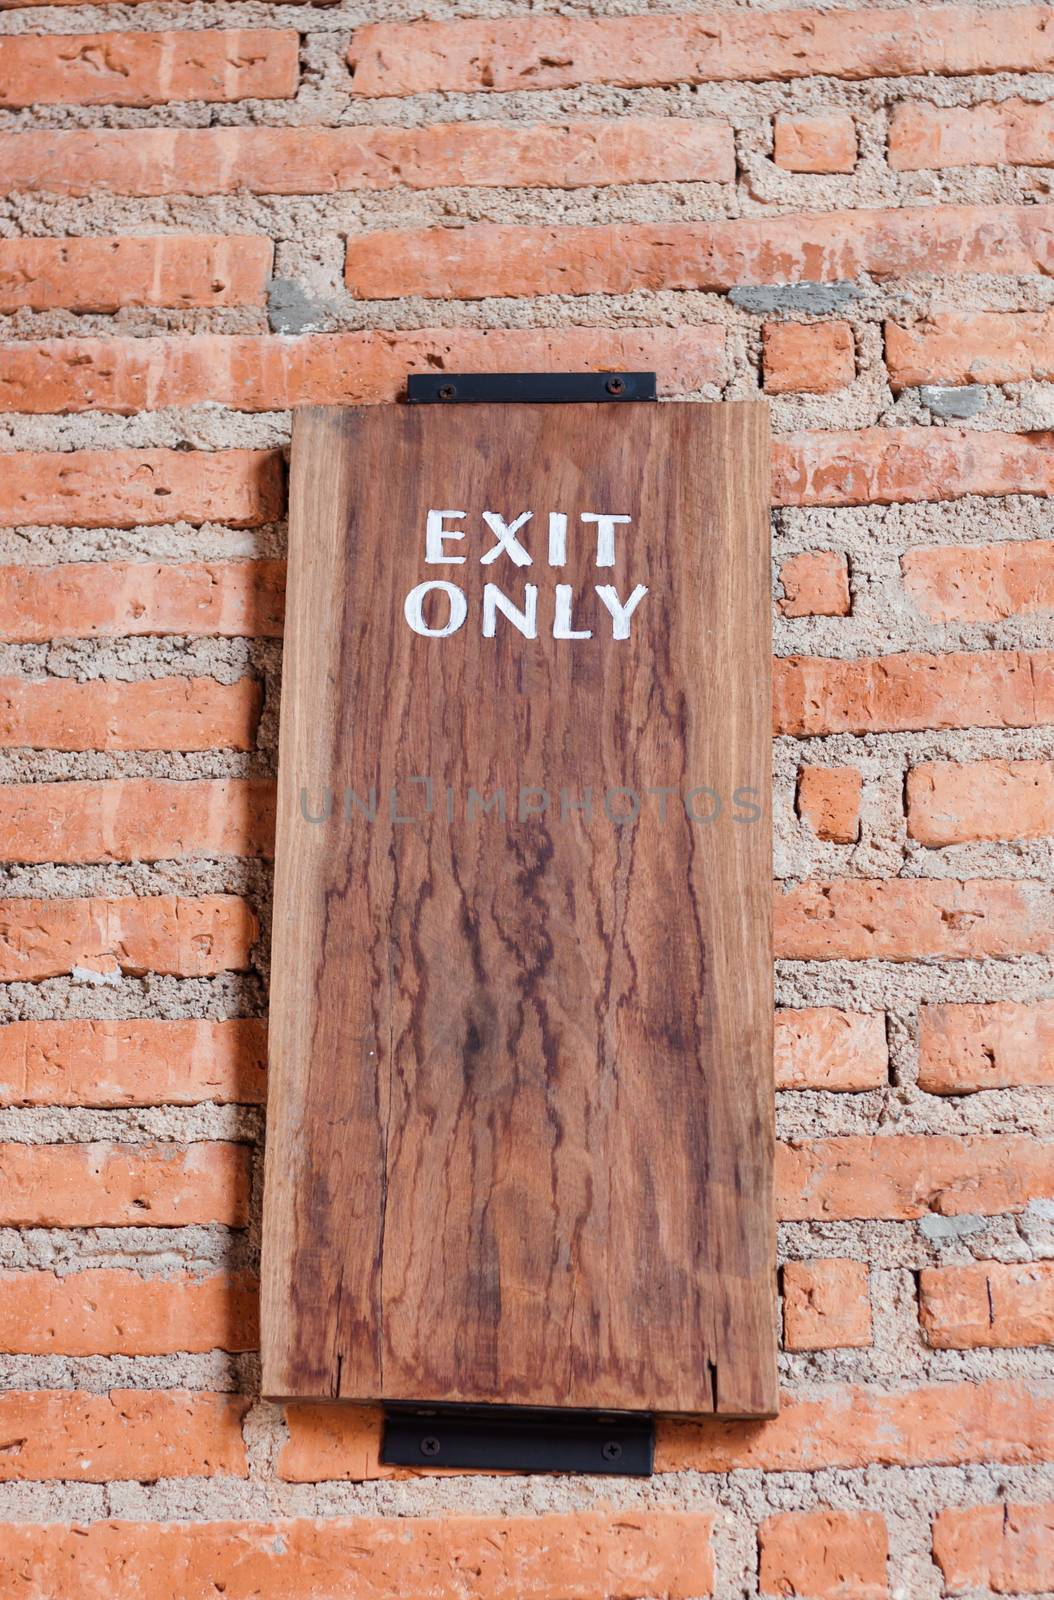 Exit only sign on brick wall by punsayaporn